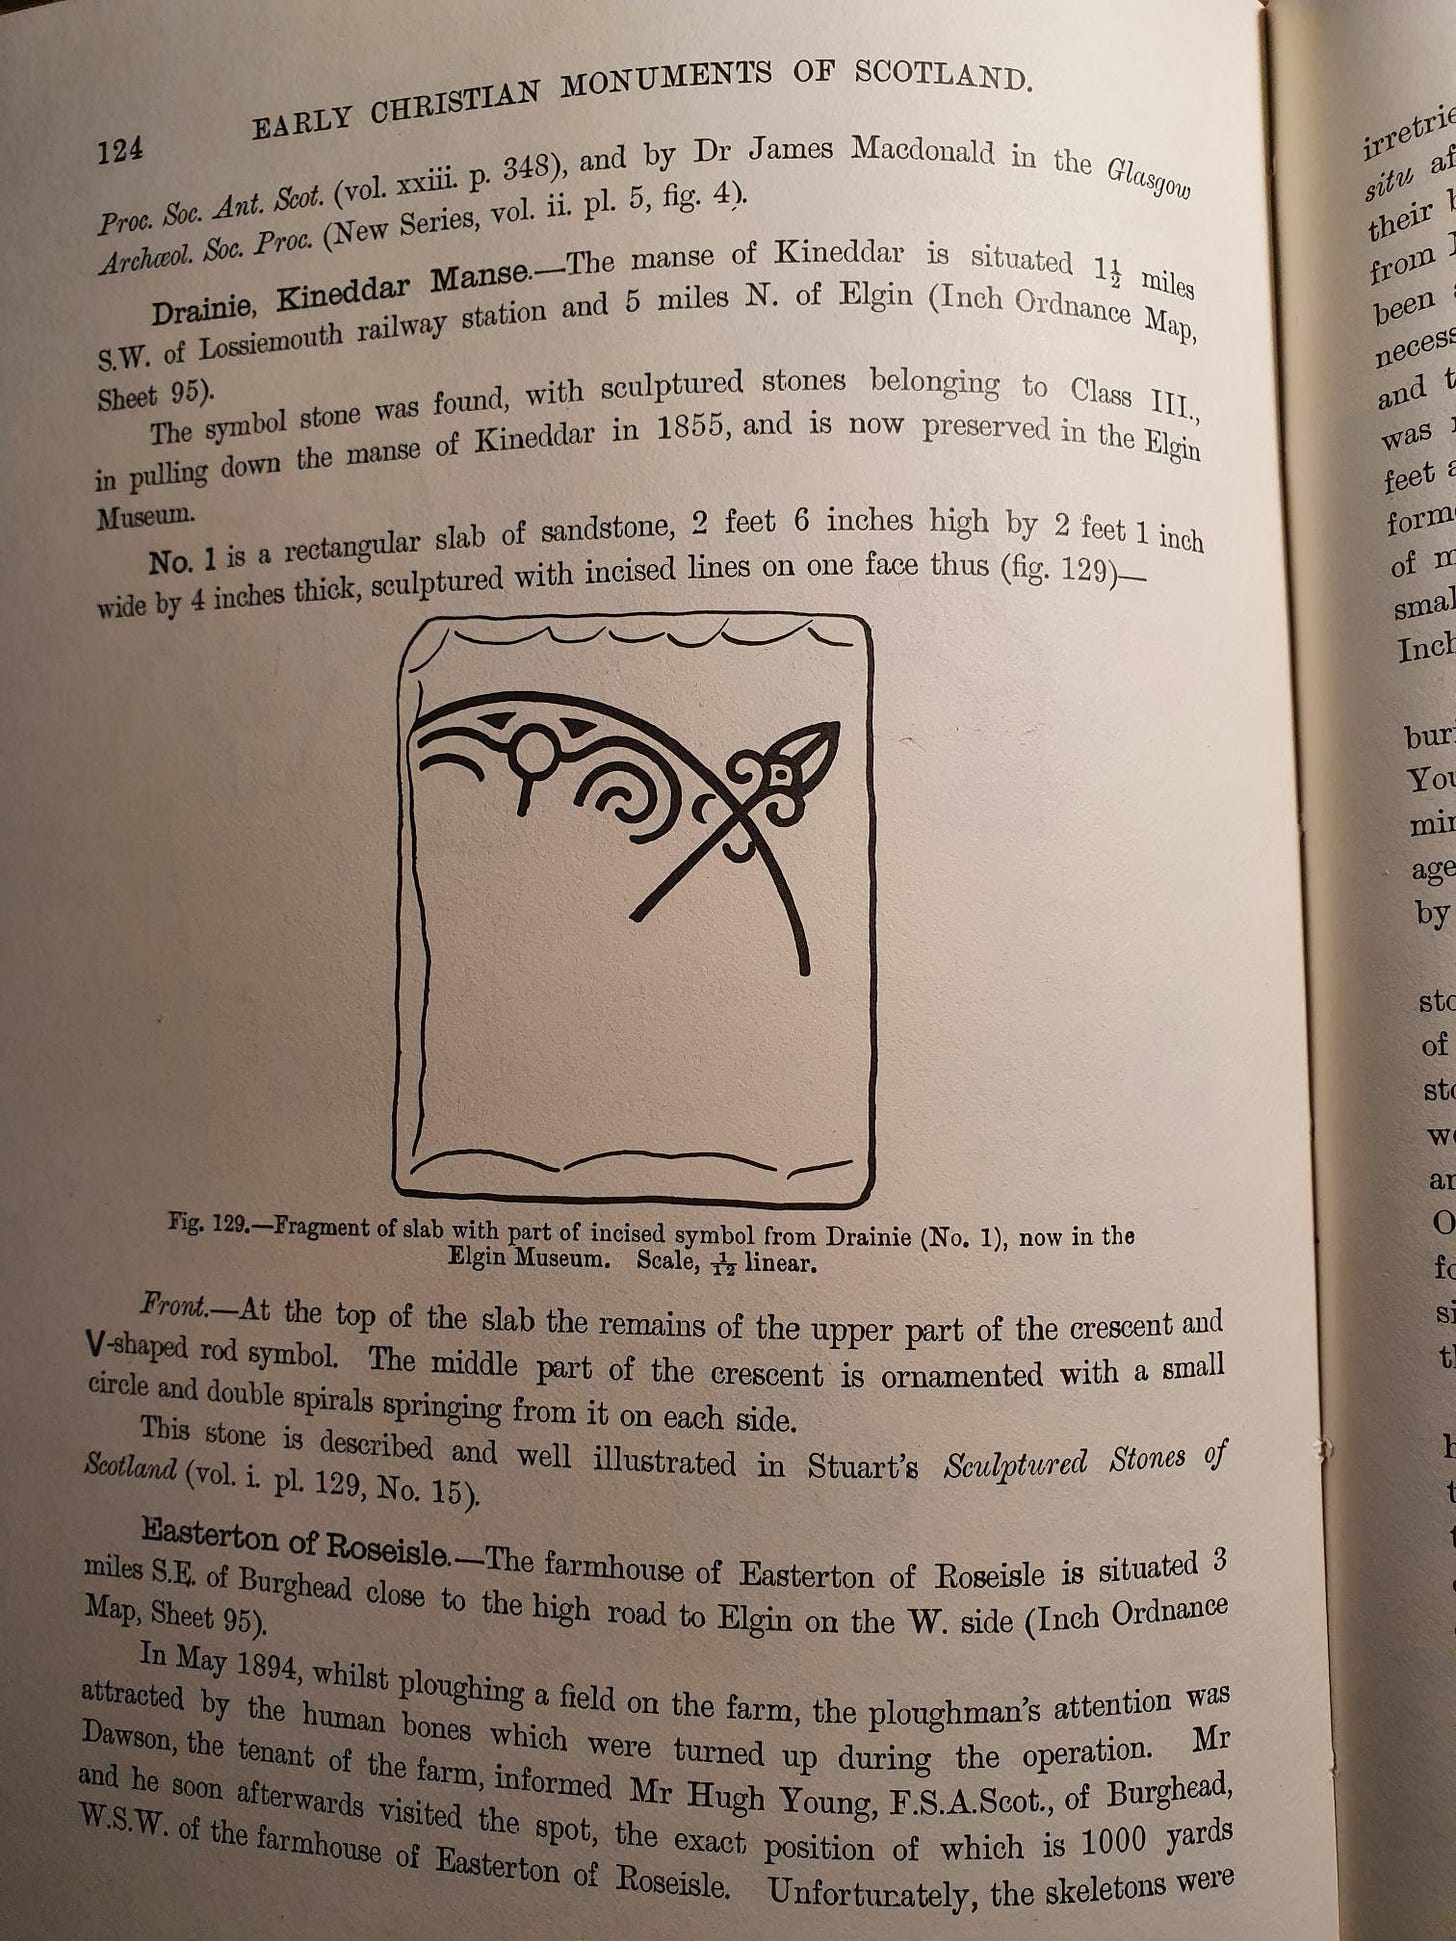 Photo of a page in Allen and Anderson's The Early Christian Monuments of Scotland, with a drawing of the Class I Pictish symbol stone found at Kinneddar in 1855. It's the top portion of a crescent and v-rod symbol with internal decoration in the crescent and floriated end to the v-rod.